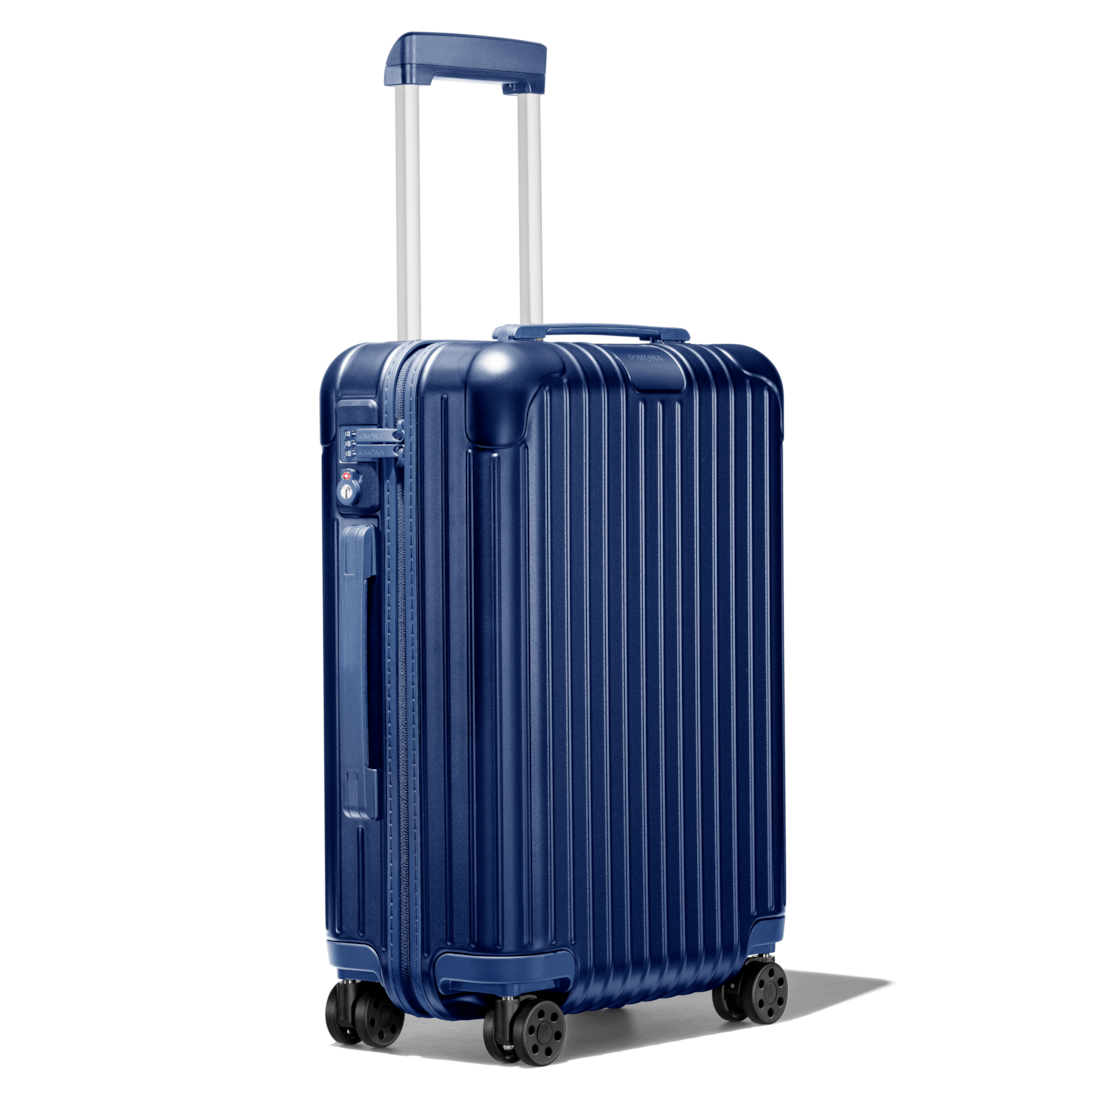 Essential Cabin S Lightweight Carry-On Suitcase | Matte Blue | RIMOWA